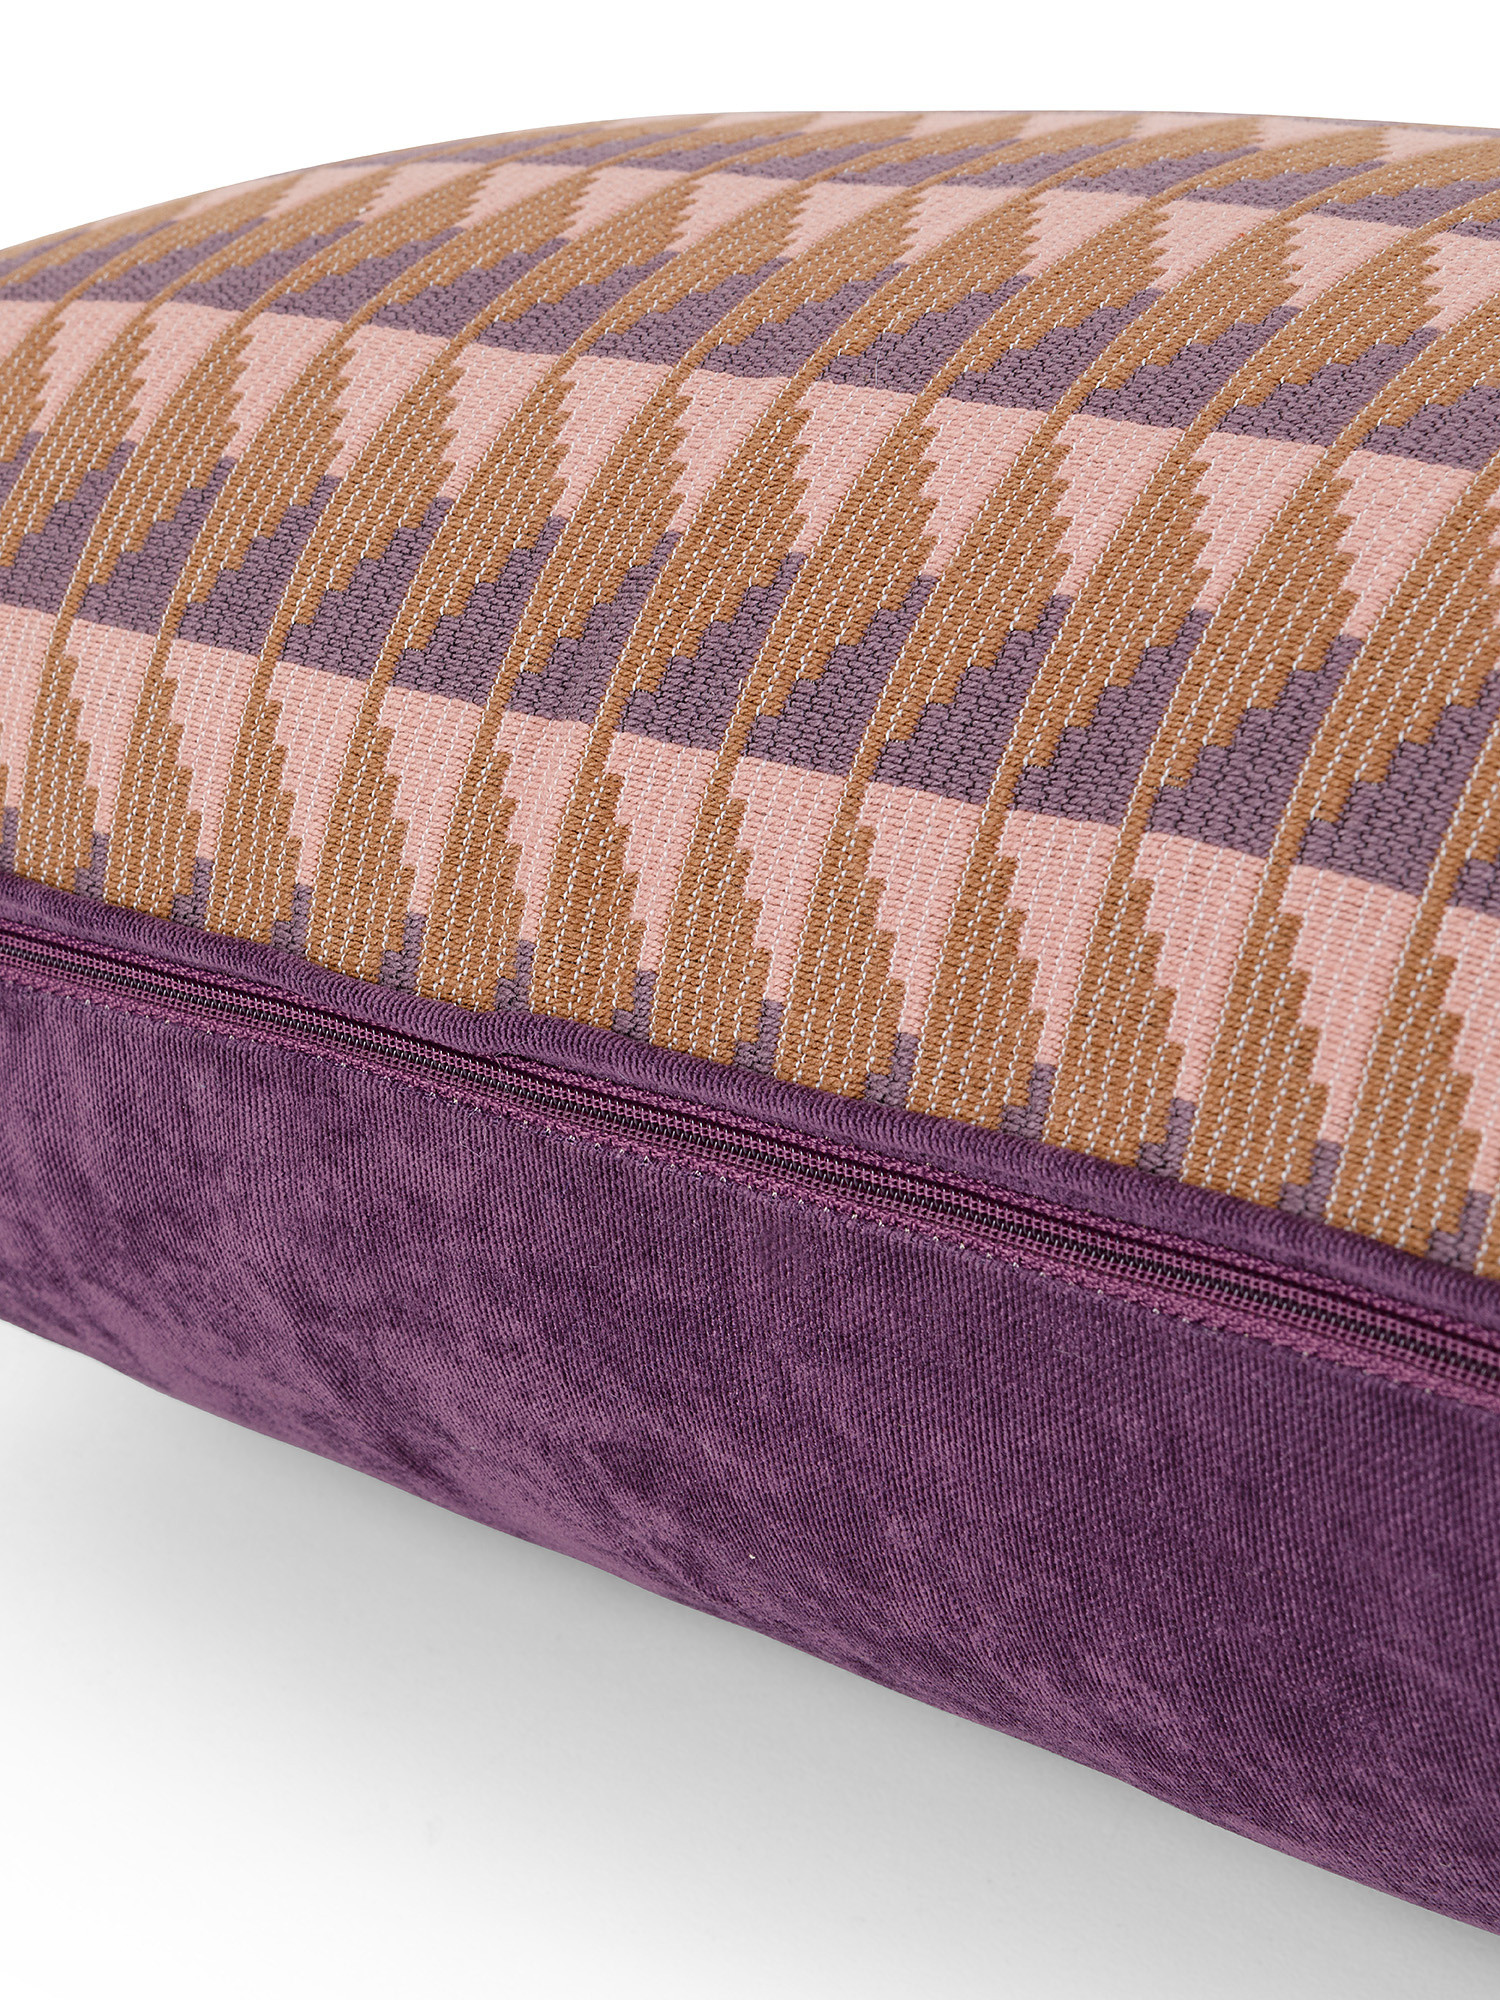 Jacquard cushion with zig zag motif 35x55cm, Brown, large image number 2